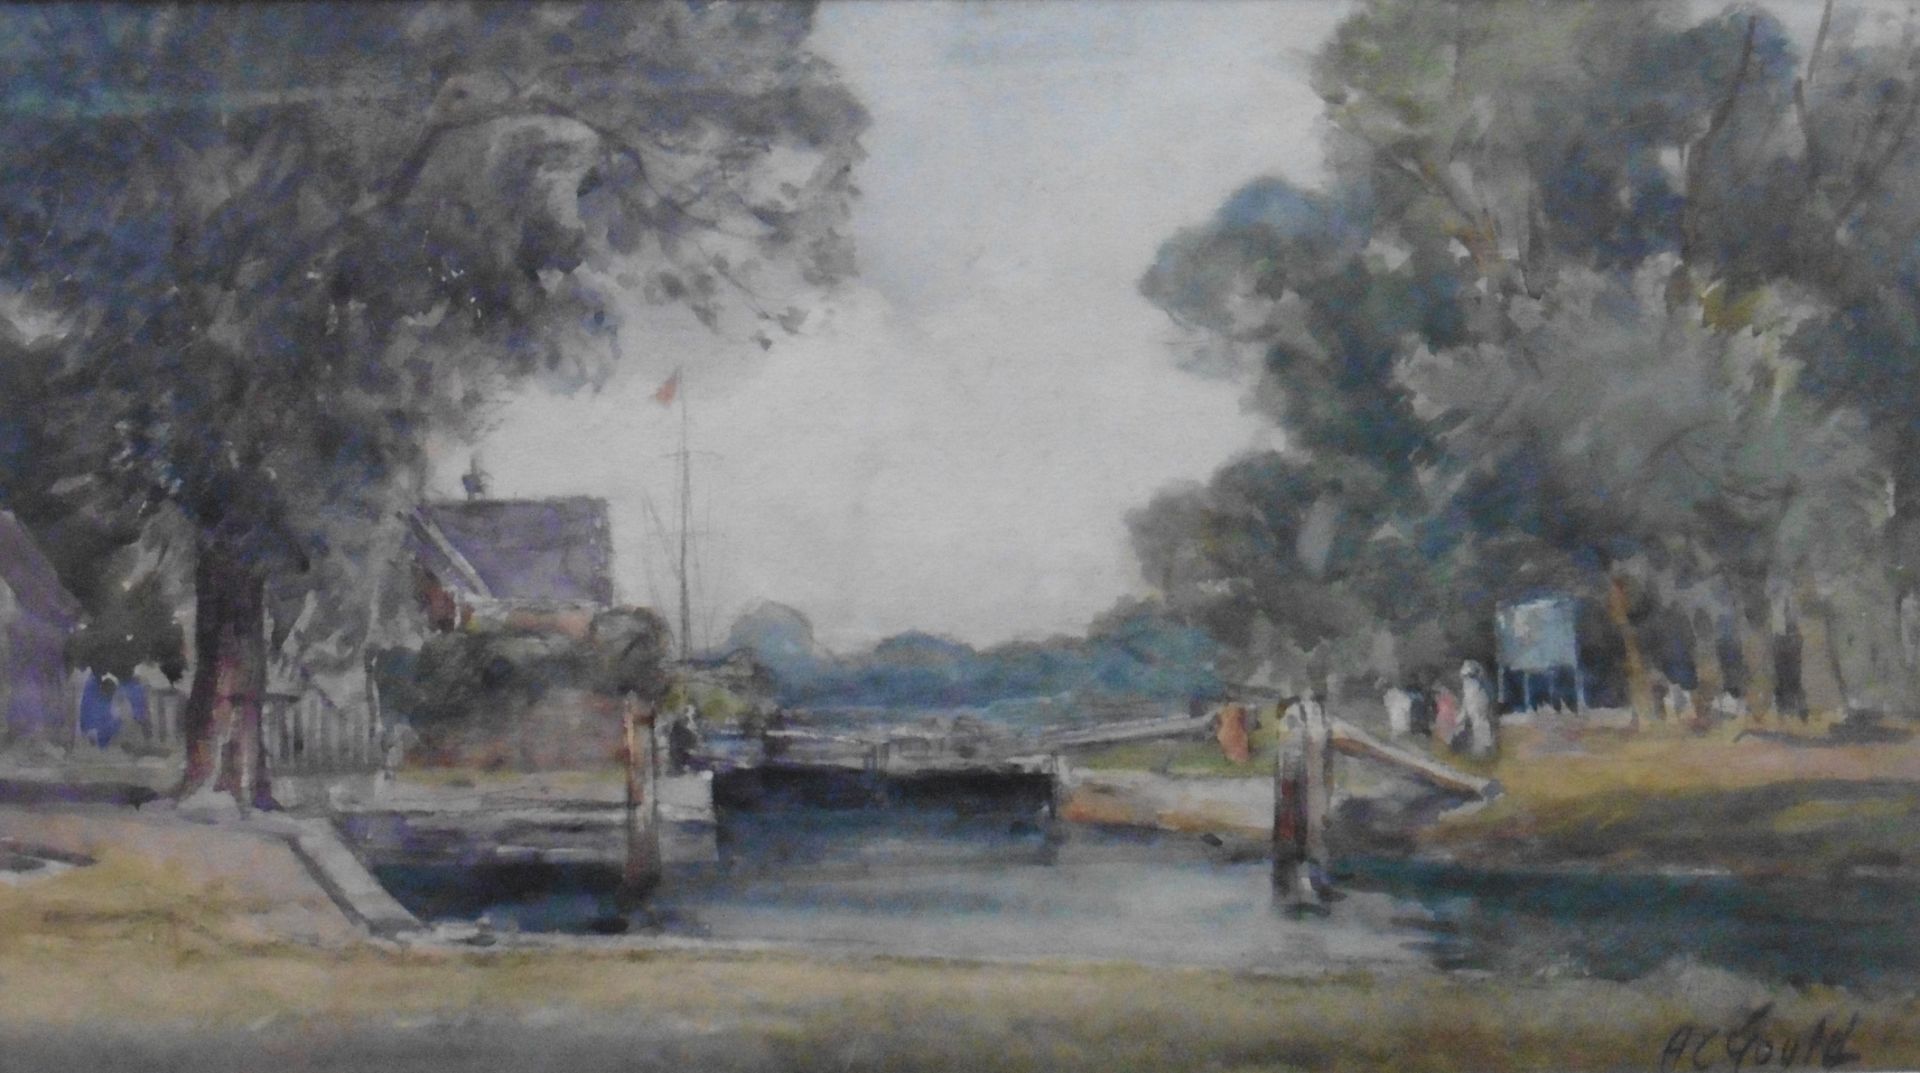 Original watercolour by Alexander Carruthers Gould 1870-1948 - Lock gates - Image 4 of 6